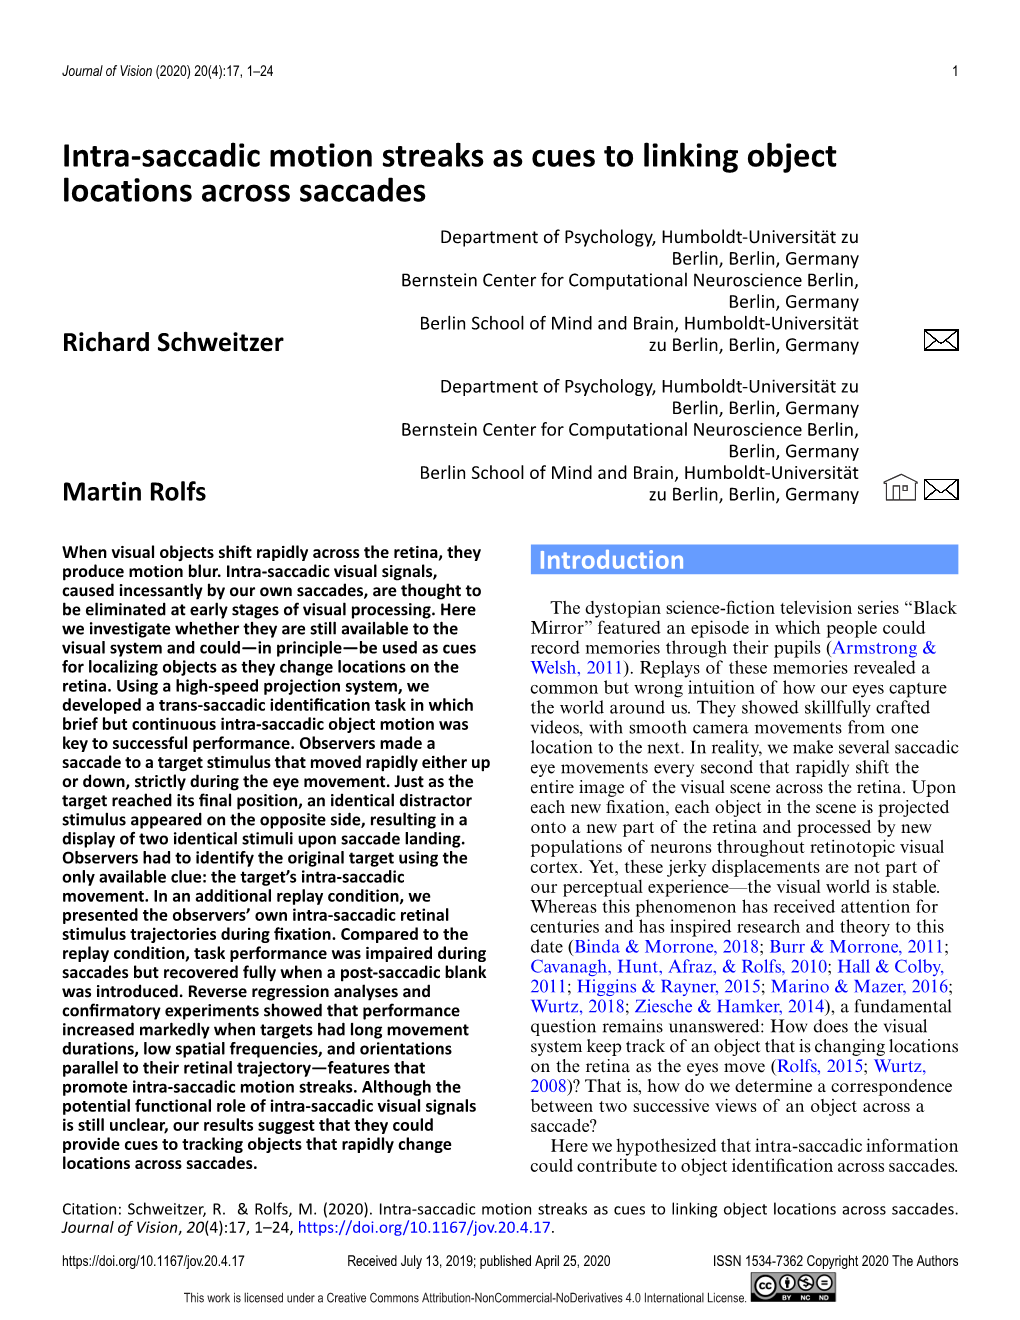 Intra-Saccadic Motion Streaks As Cues to Linking Object Locations Across